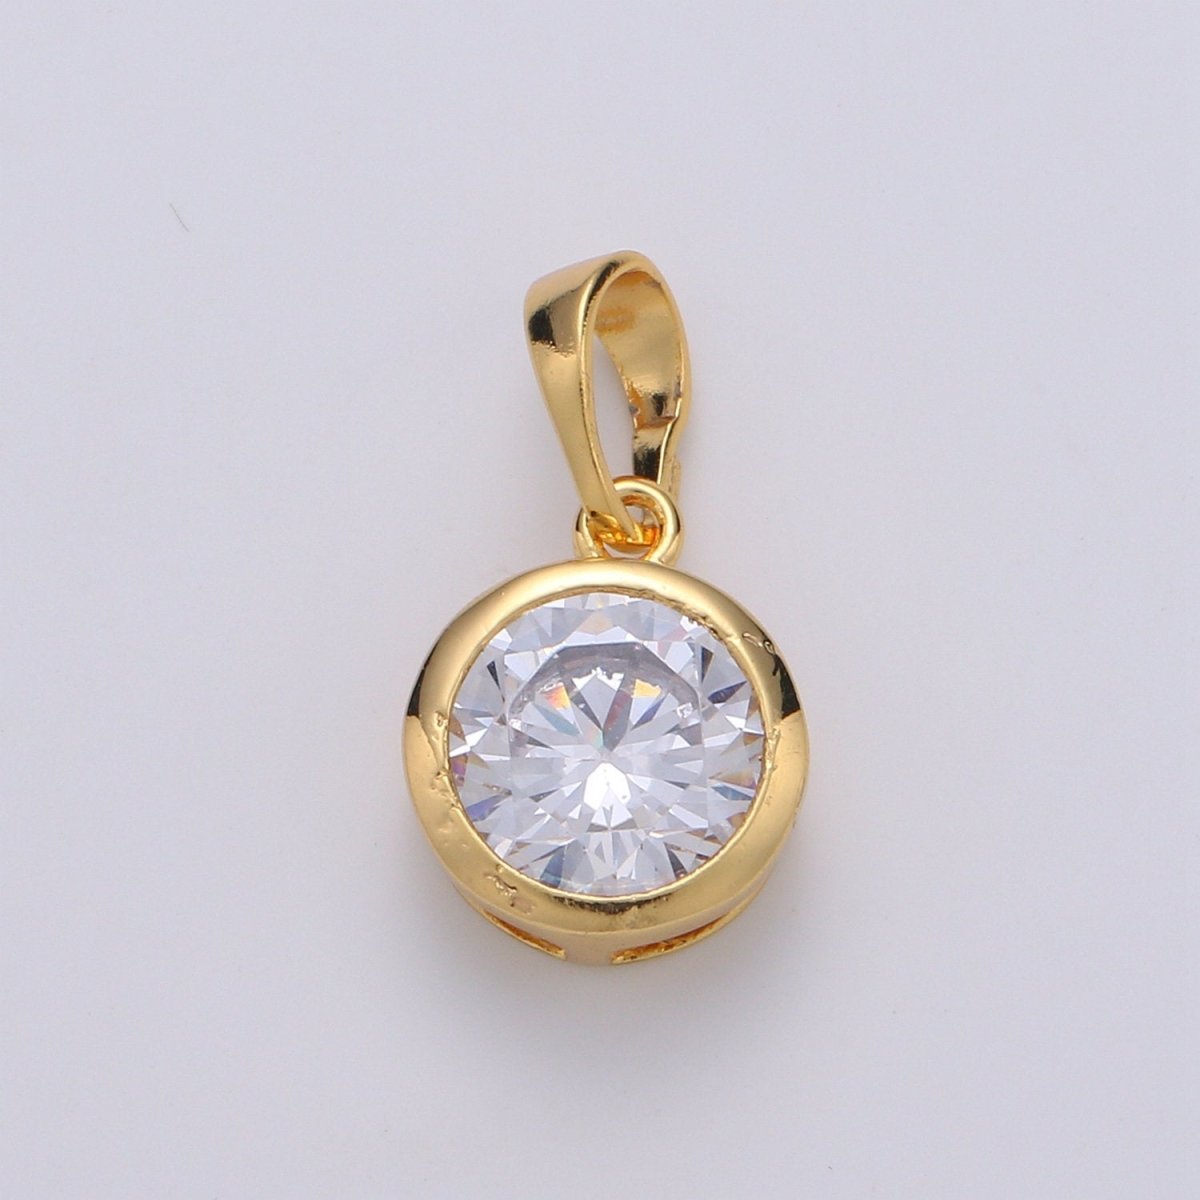 18X10mm Solitaire Pendant 24k Gold Filled Round Cut Pendant for necklace April Birthstone, Clear Cubic Zirconia Round Charm J-075 - DLUXCA